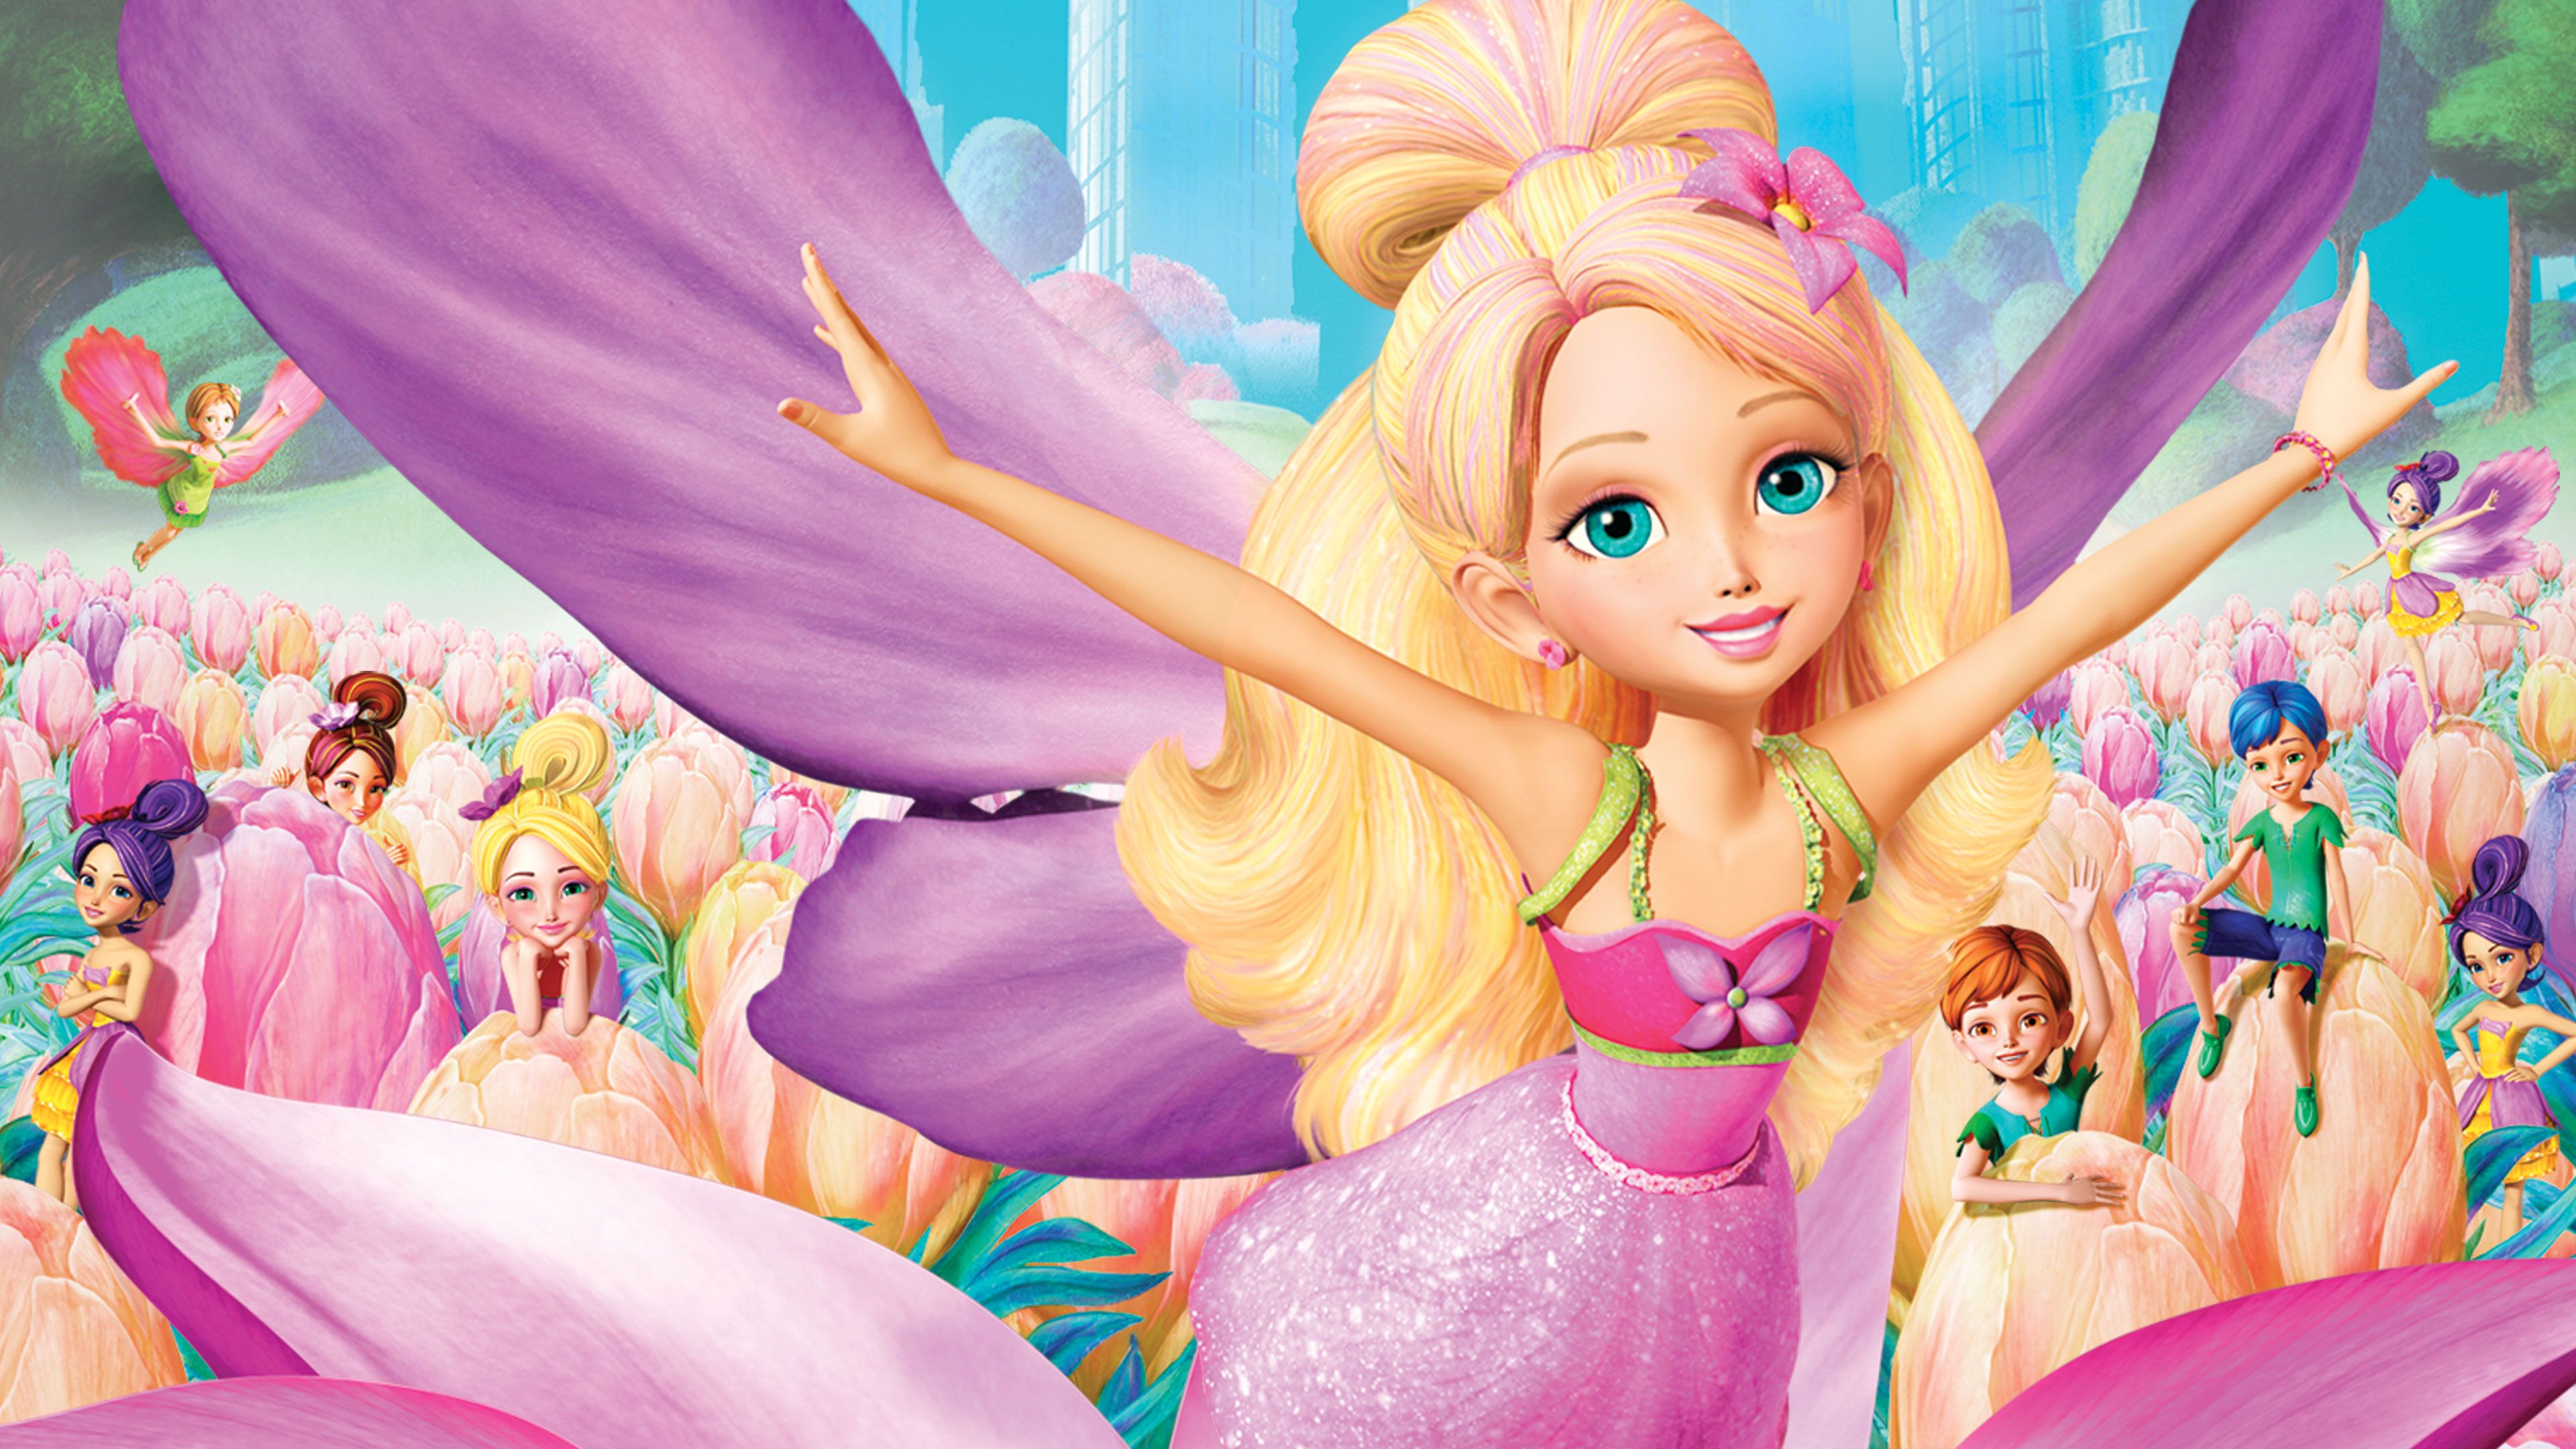 Watch Barbie Presents Thumbelina (2009) Movie Online For Free in English Full Length